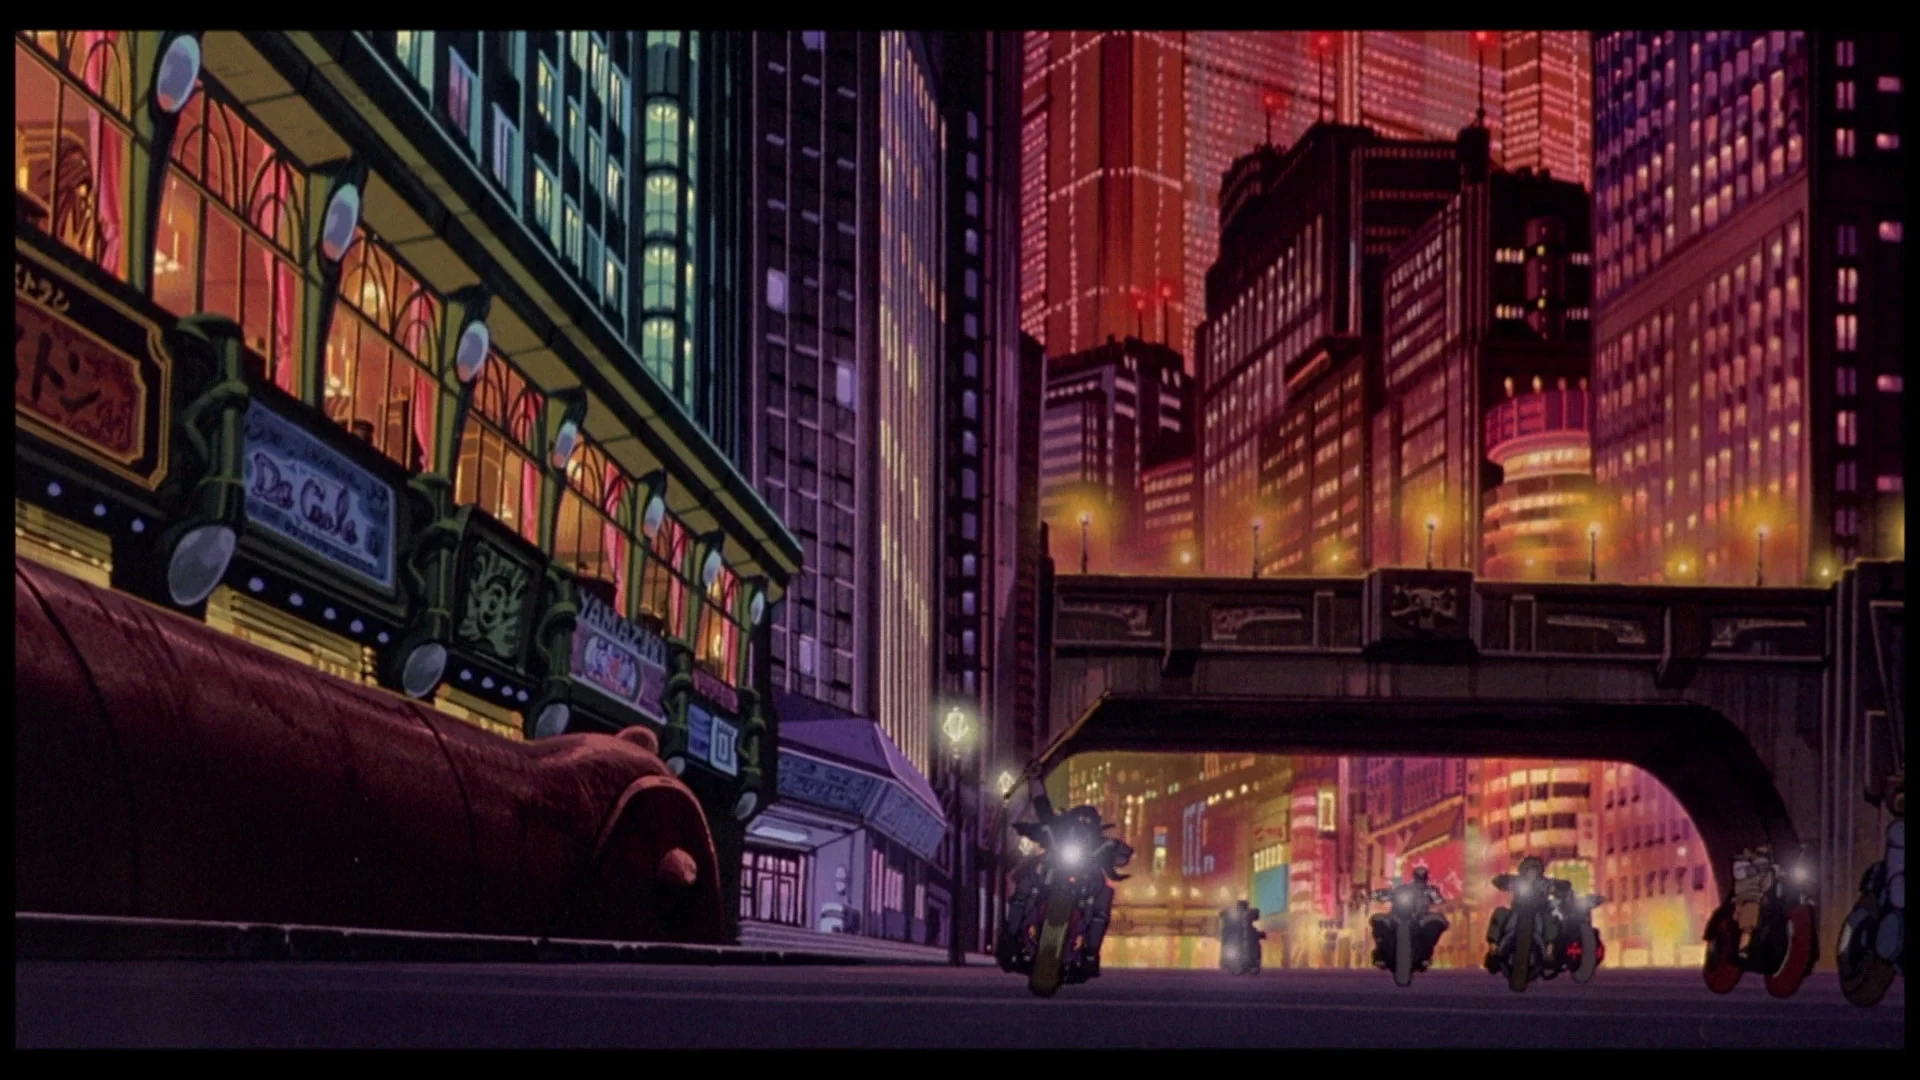 HD Wallpaper and background photos of Akira Screencap for fans of Akira images